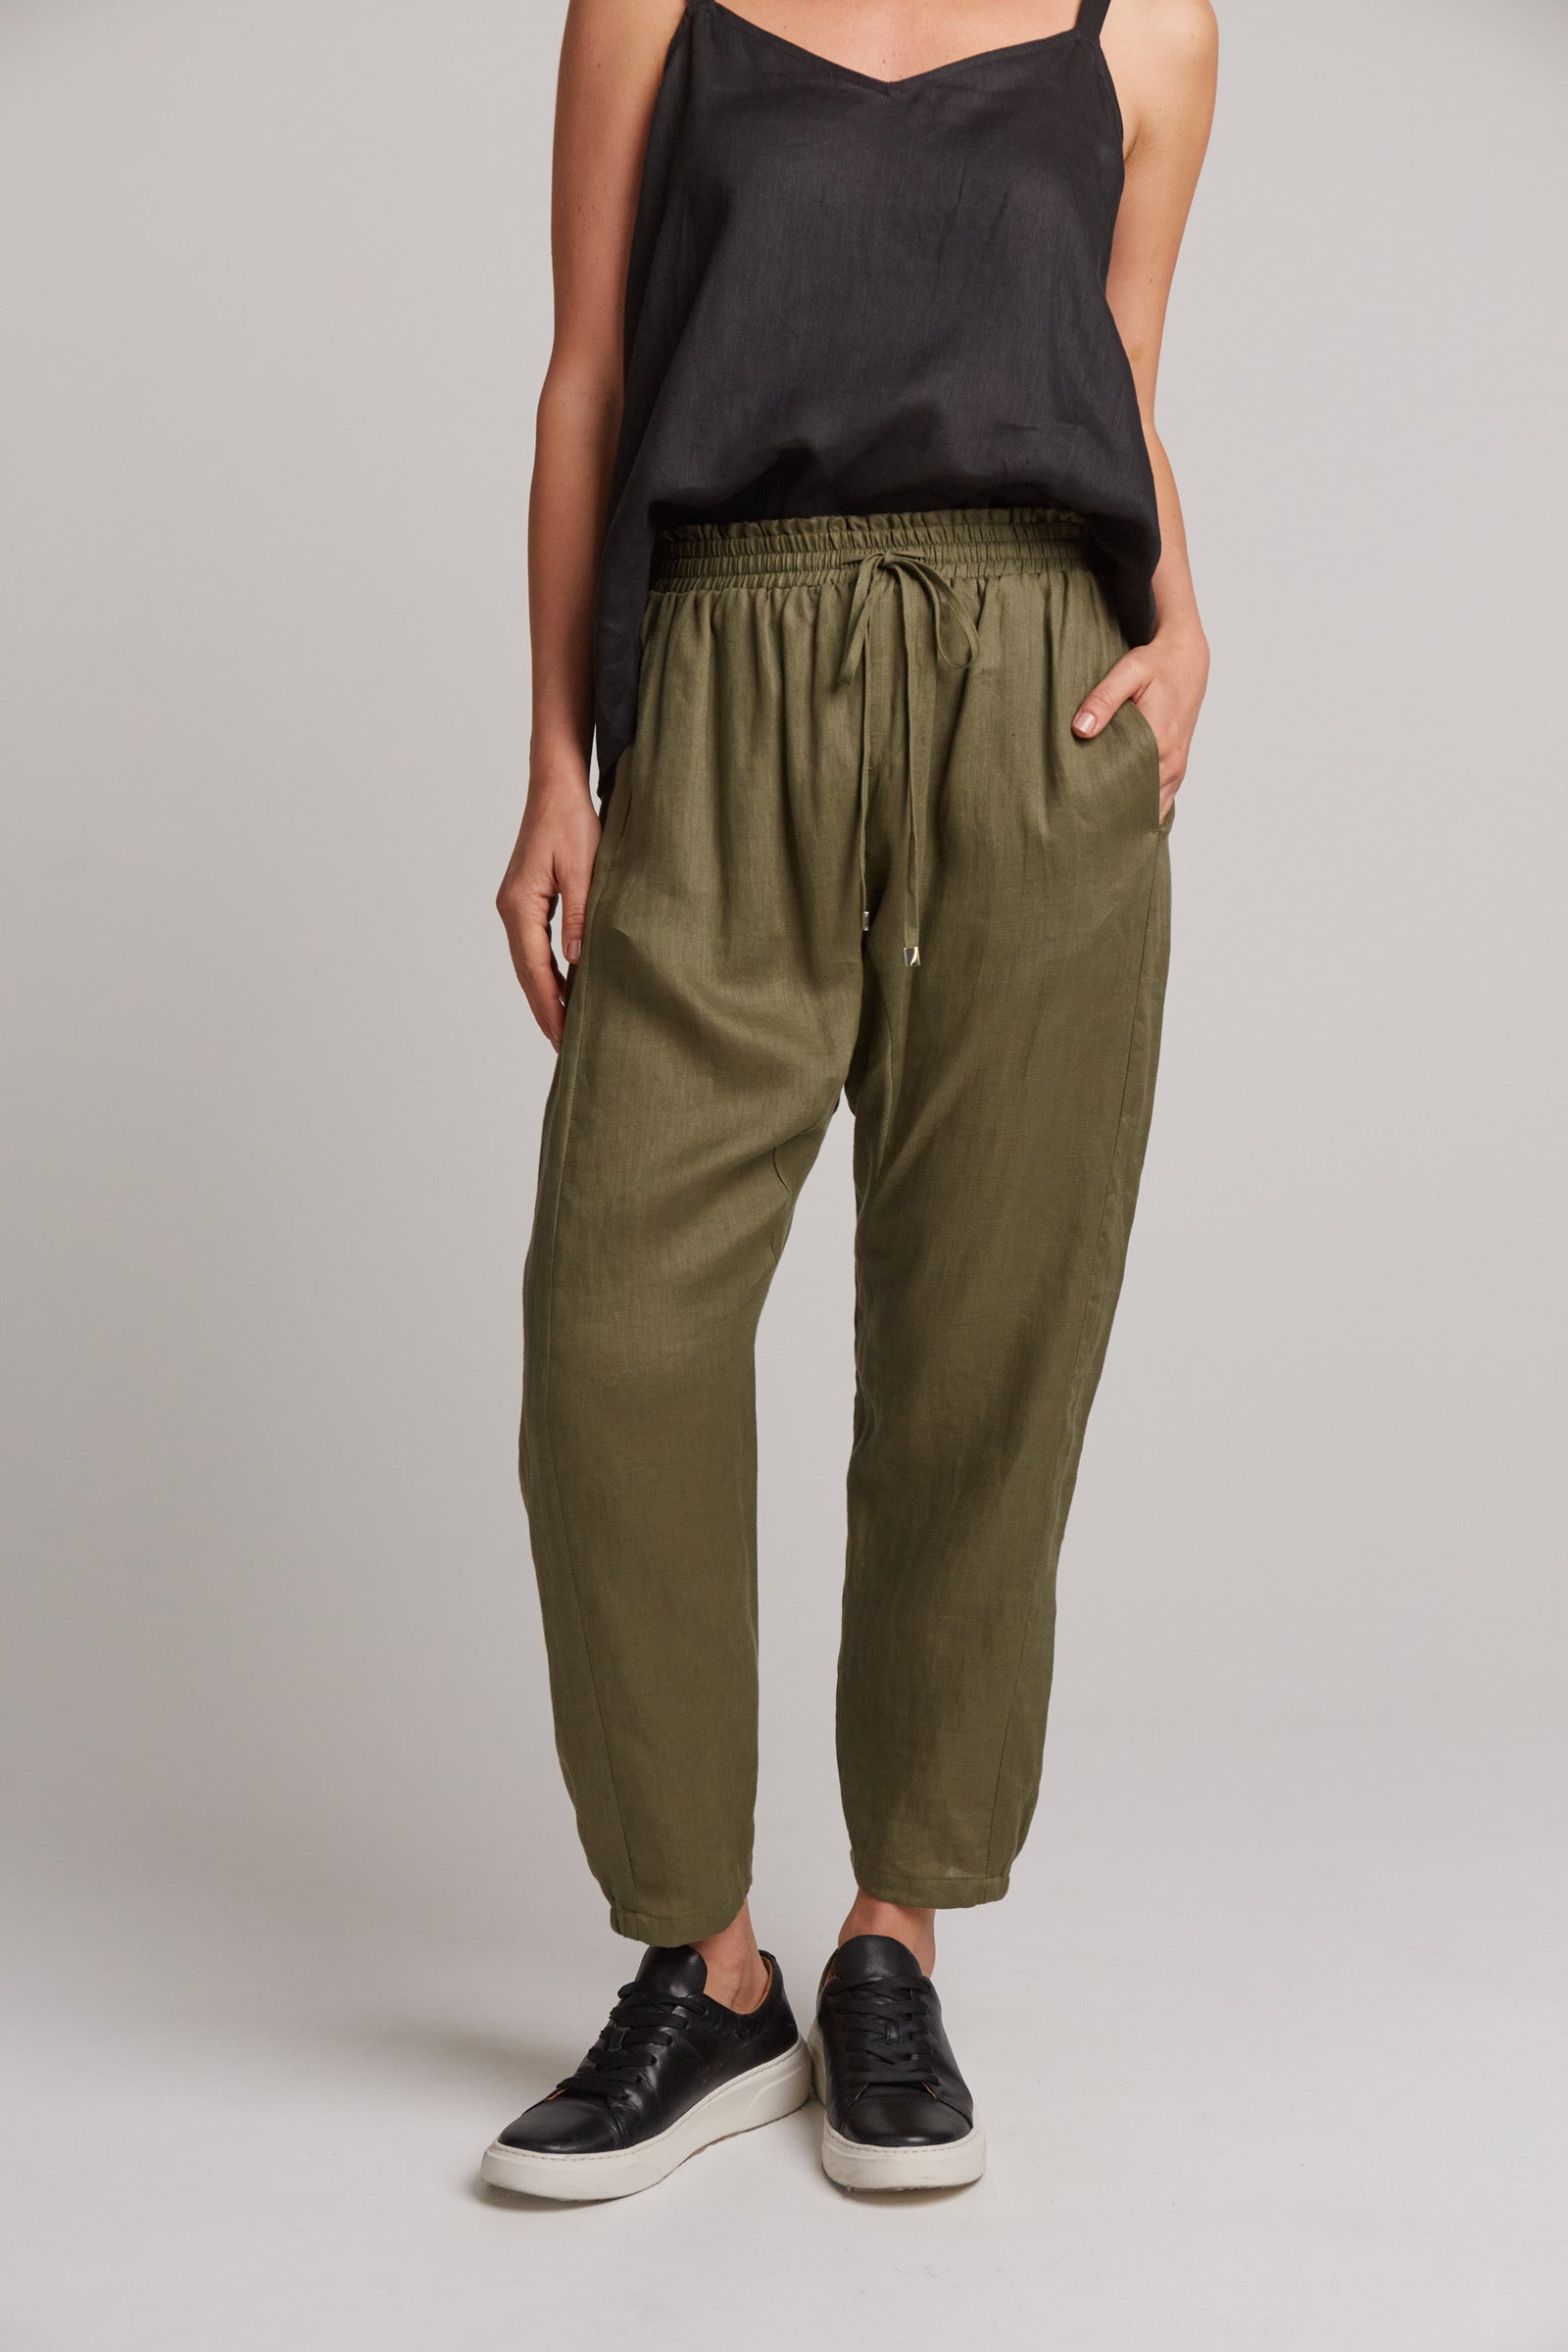 Studio Relaxed Pant - Khaki - eb&ive Clothing - Pant Relaxed Linen